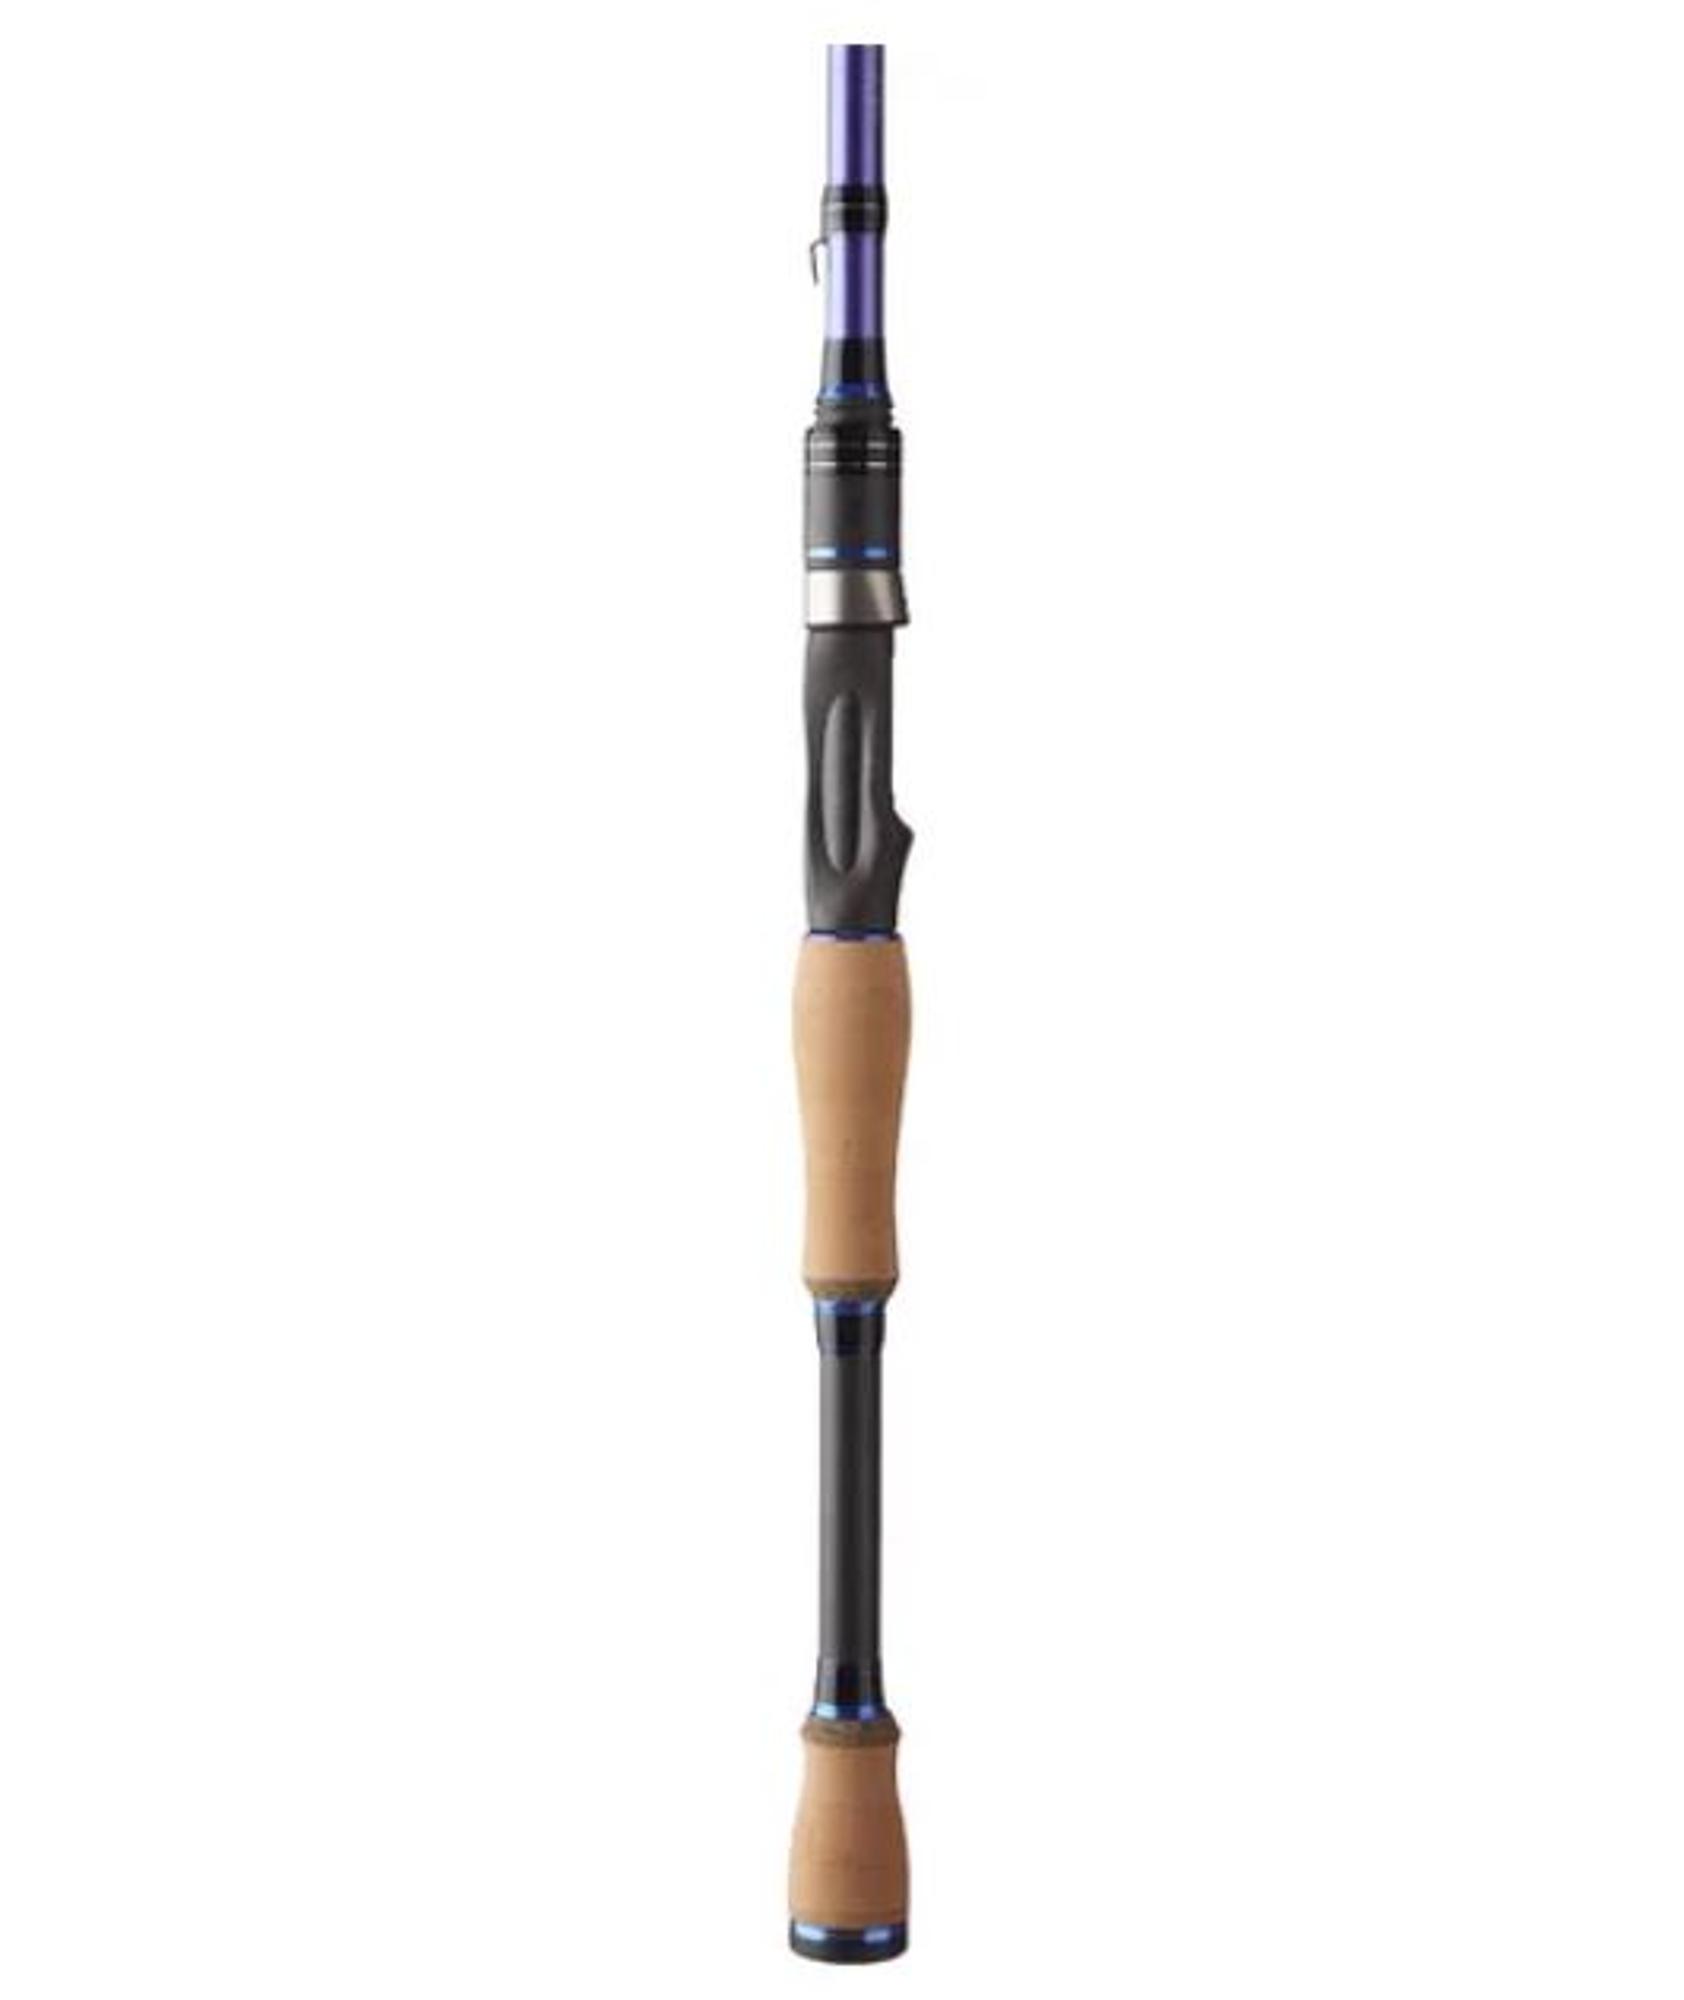 Endurance 703 MEFF SPIN 7ft Medium Extra Fast | 850033706048 | POWELL RODS | Fishing | Rods | Spinning